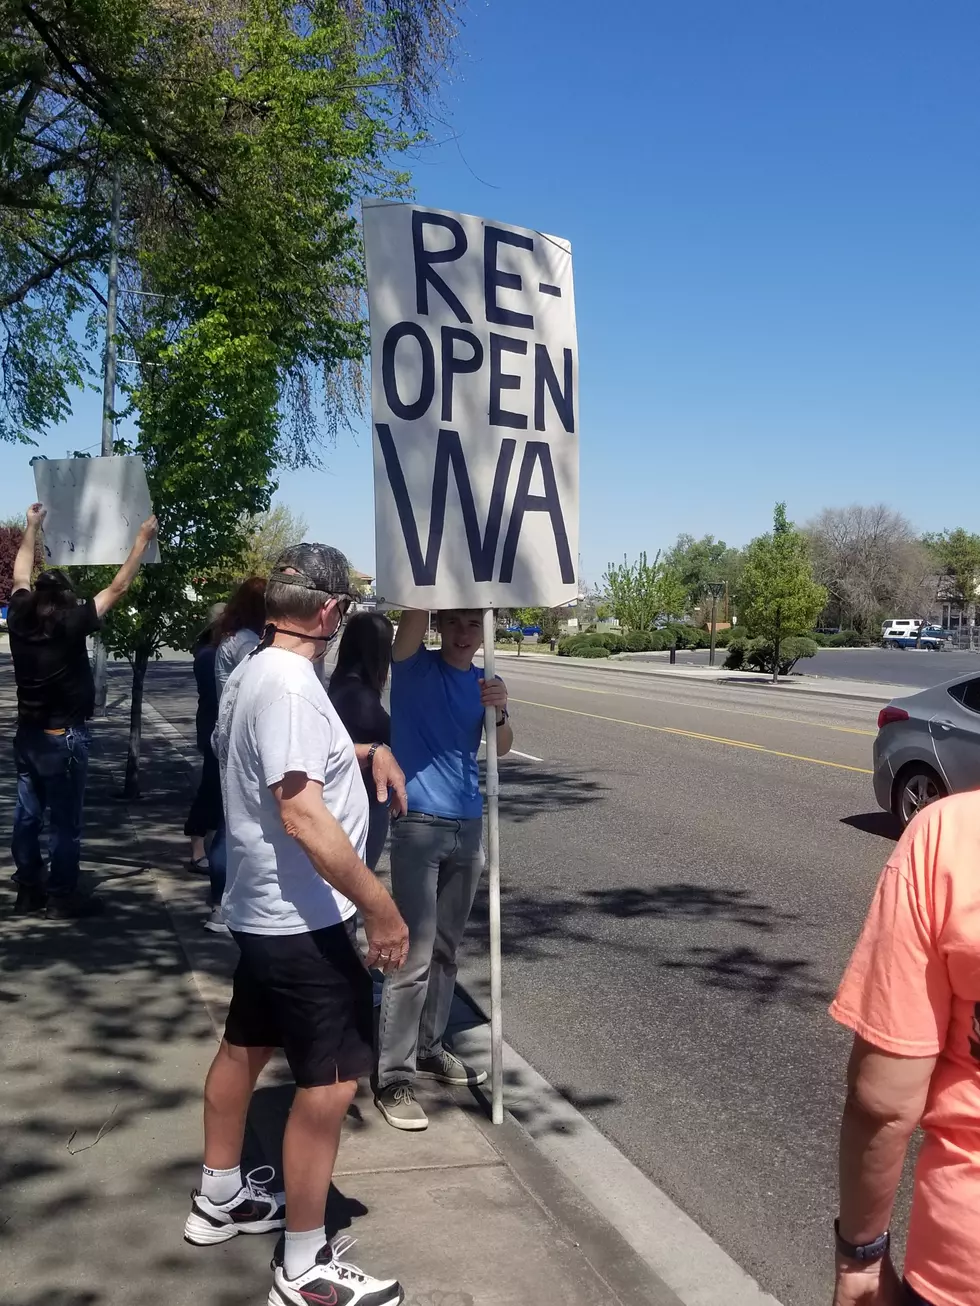 Hundreds call on Gov. Inslee to &#8220;Re-open Washington&#8221;